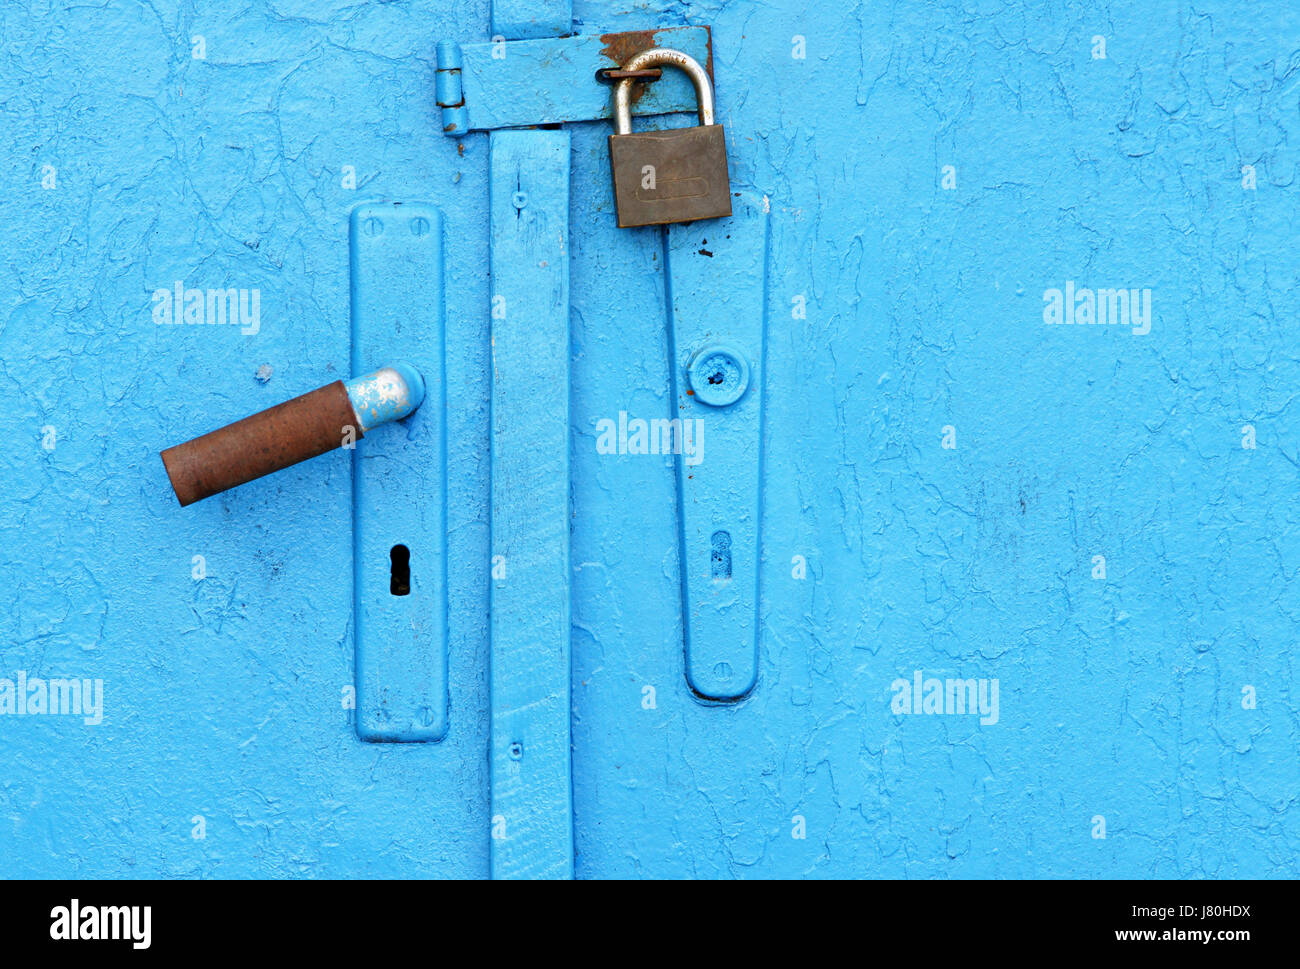 lock blue house building at home colour model design project concept plan draft Stock Photo